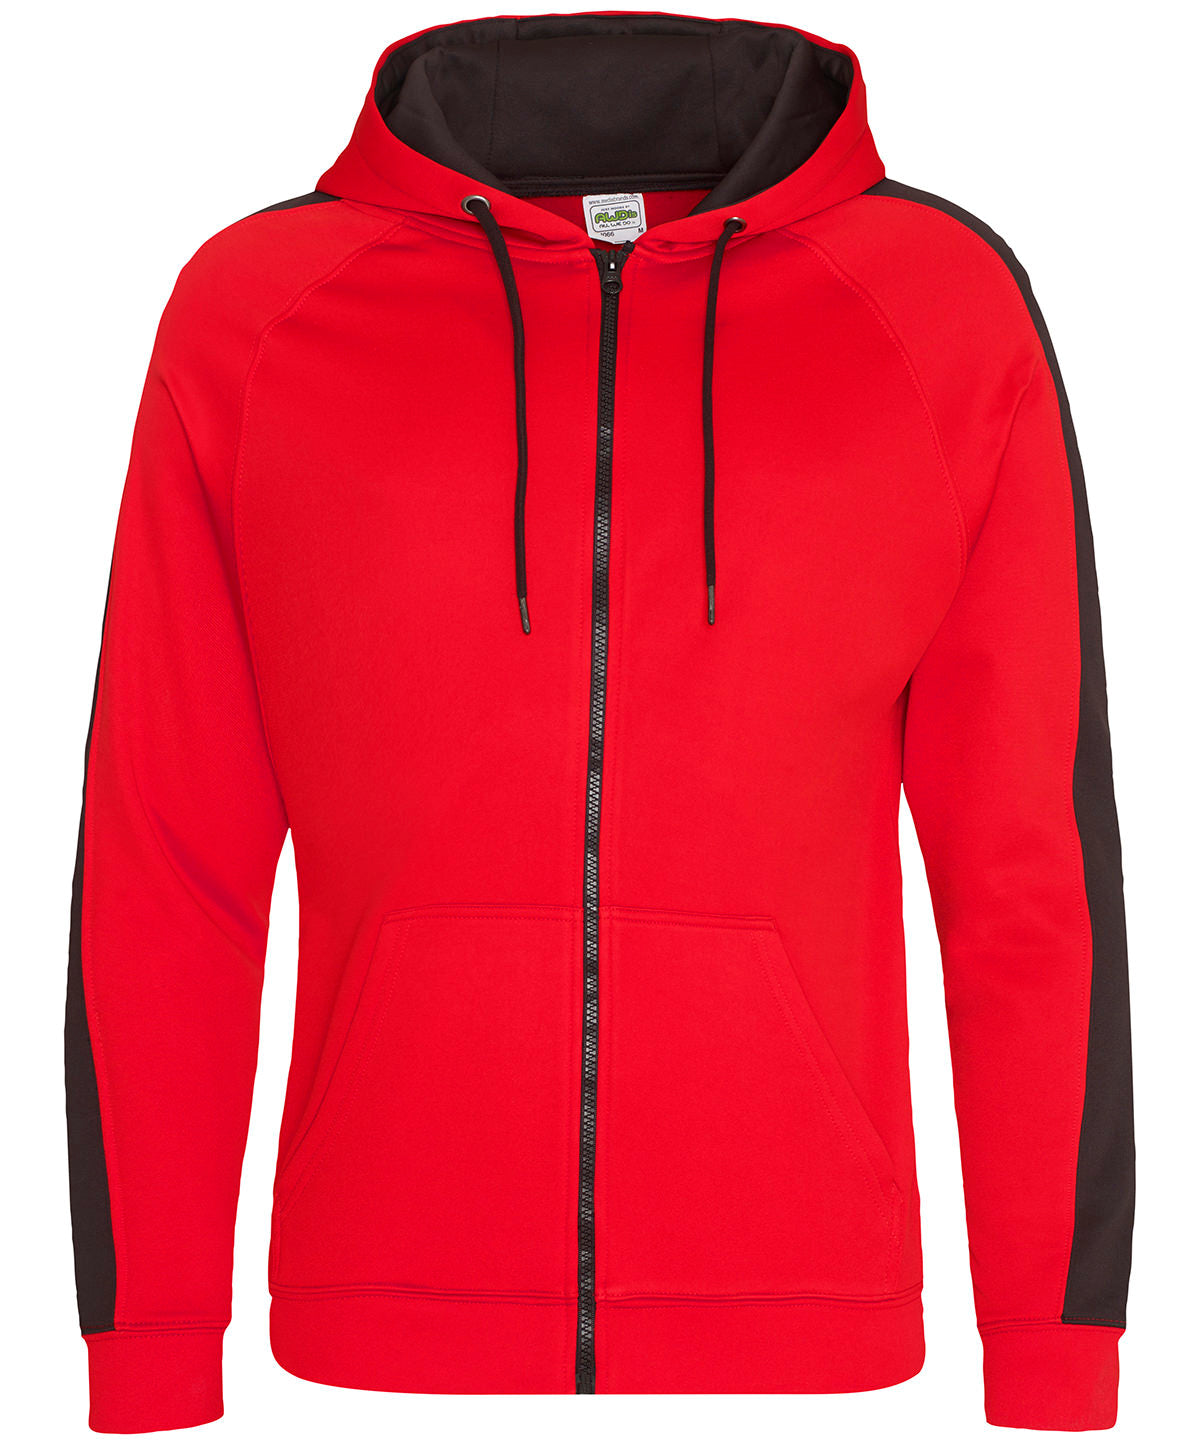 Personalised Hoodies - Mid Red AWDis Just Hoods Sports polyester zoodie